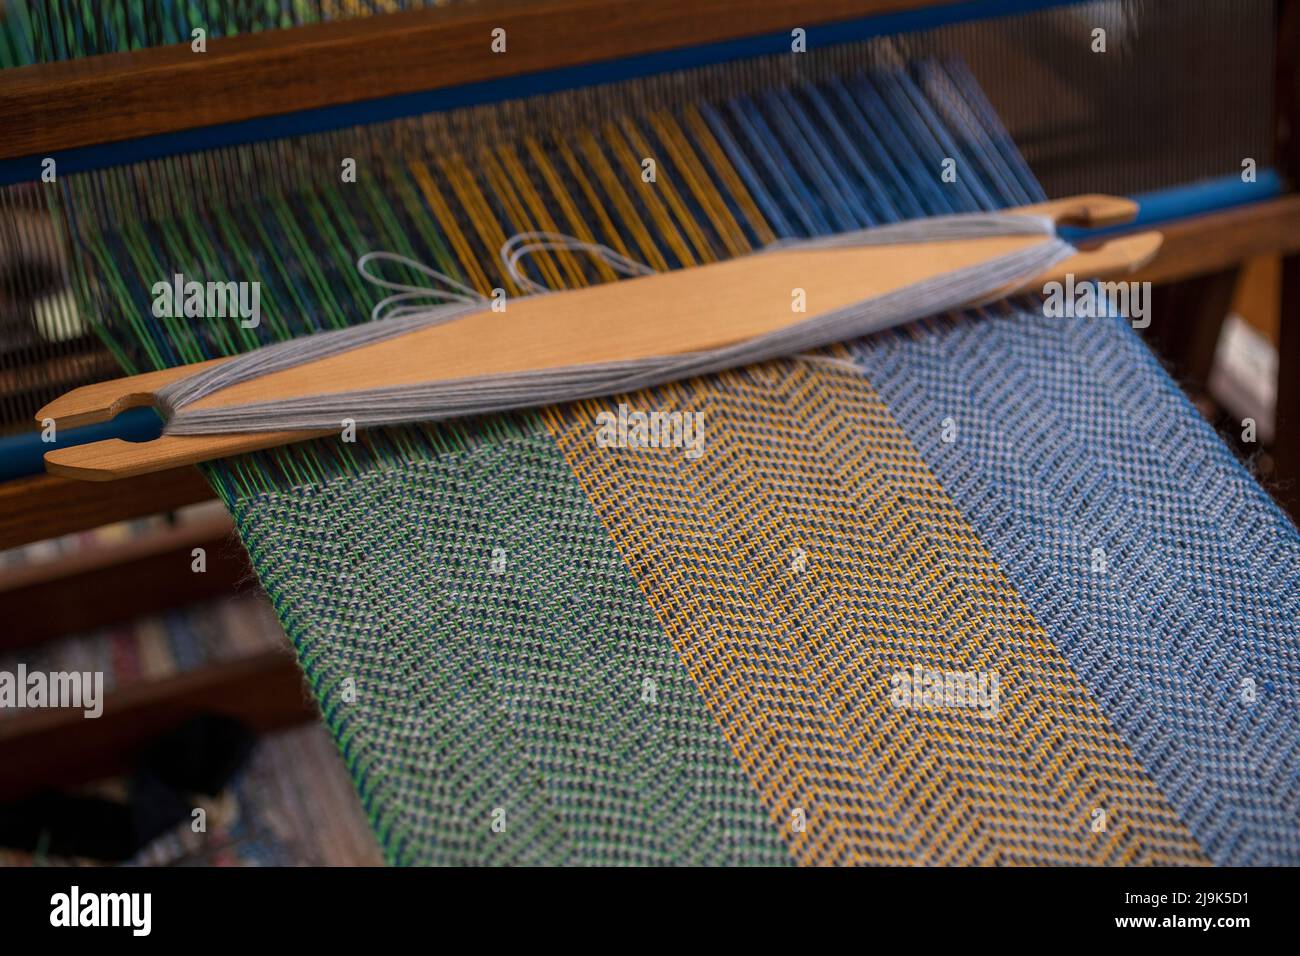 Blue, green and orange thread forming pattern on loom Stock Photo